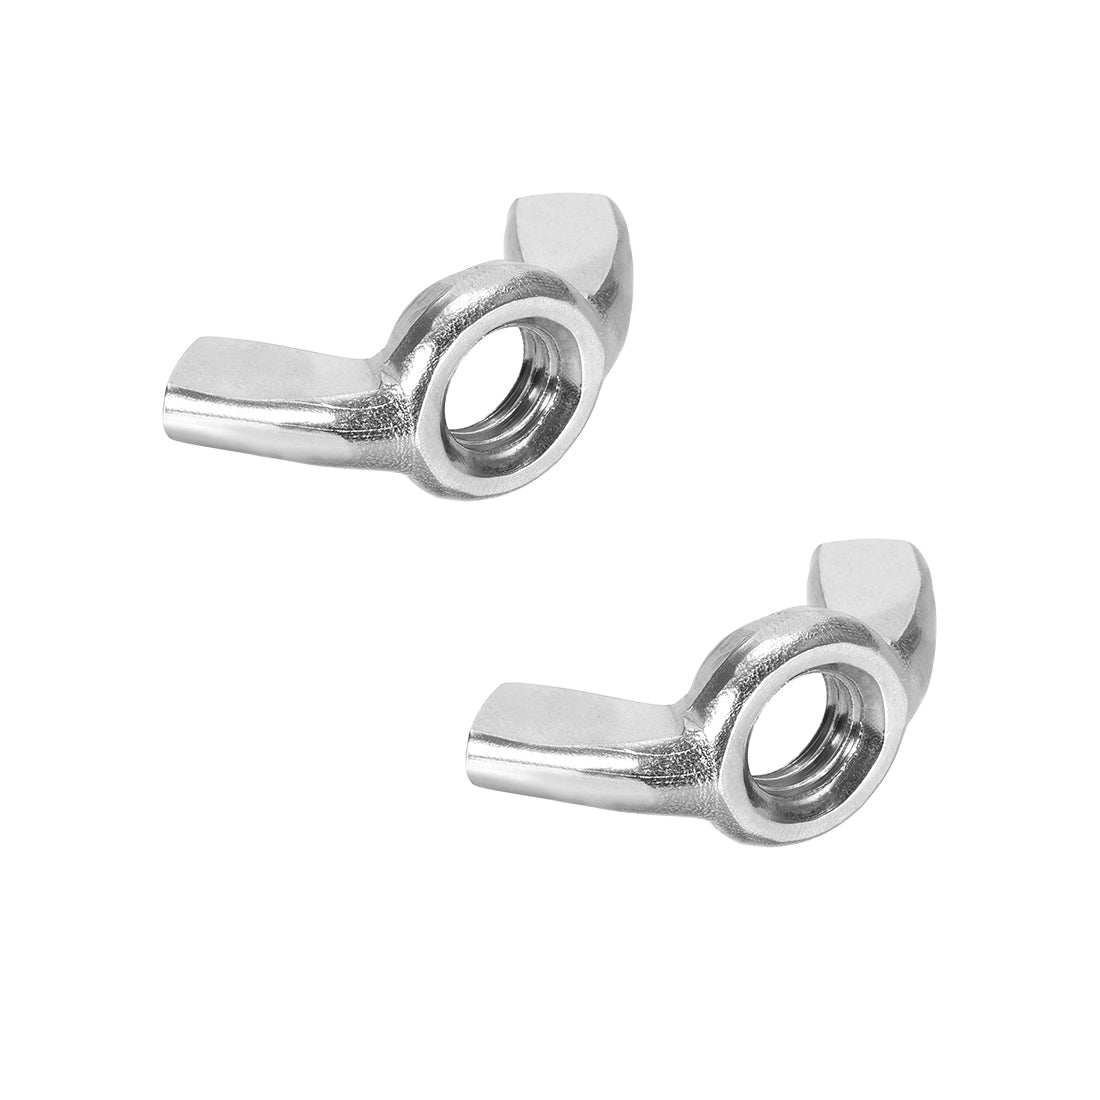 uxcell Uxcell M12 Wing Nuts, Stainless Steel 304 Hand Twist Tighten Ear Butterfly Nuts, 2 Pcs